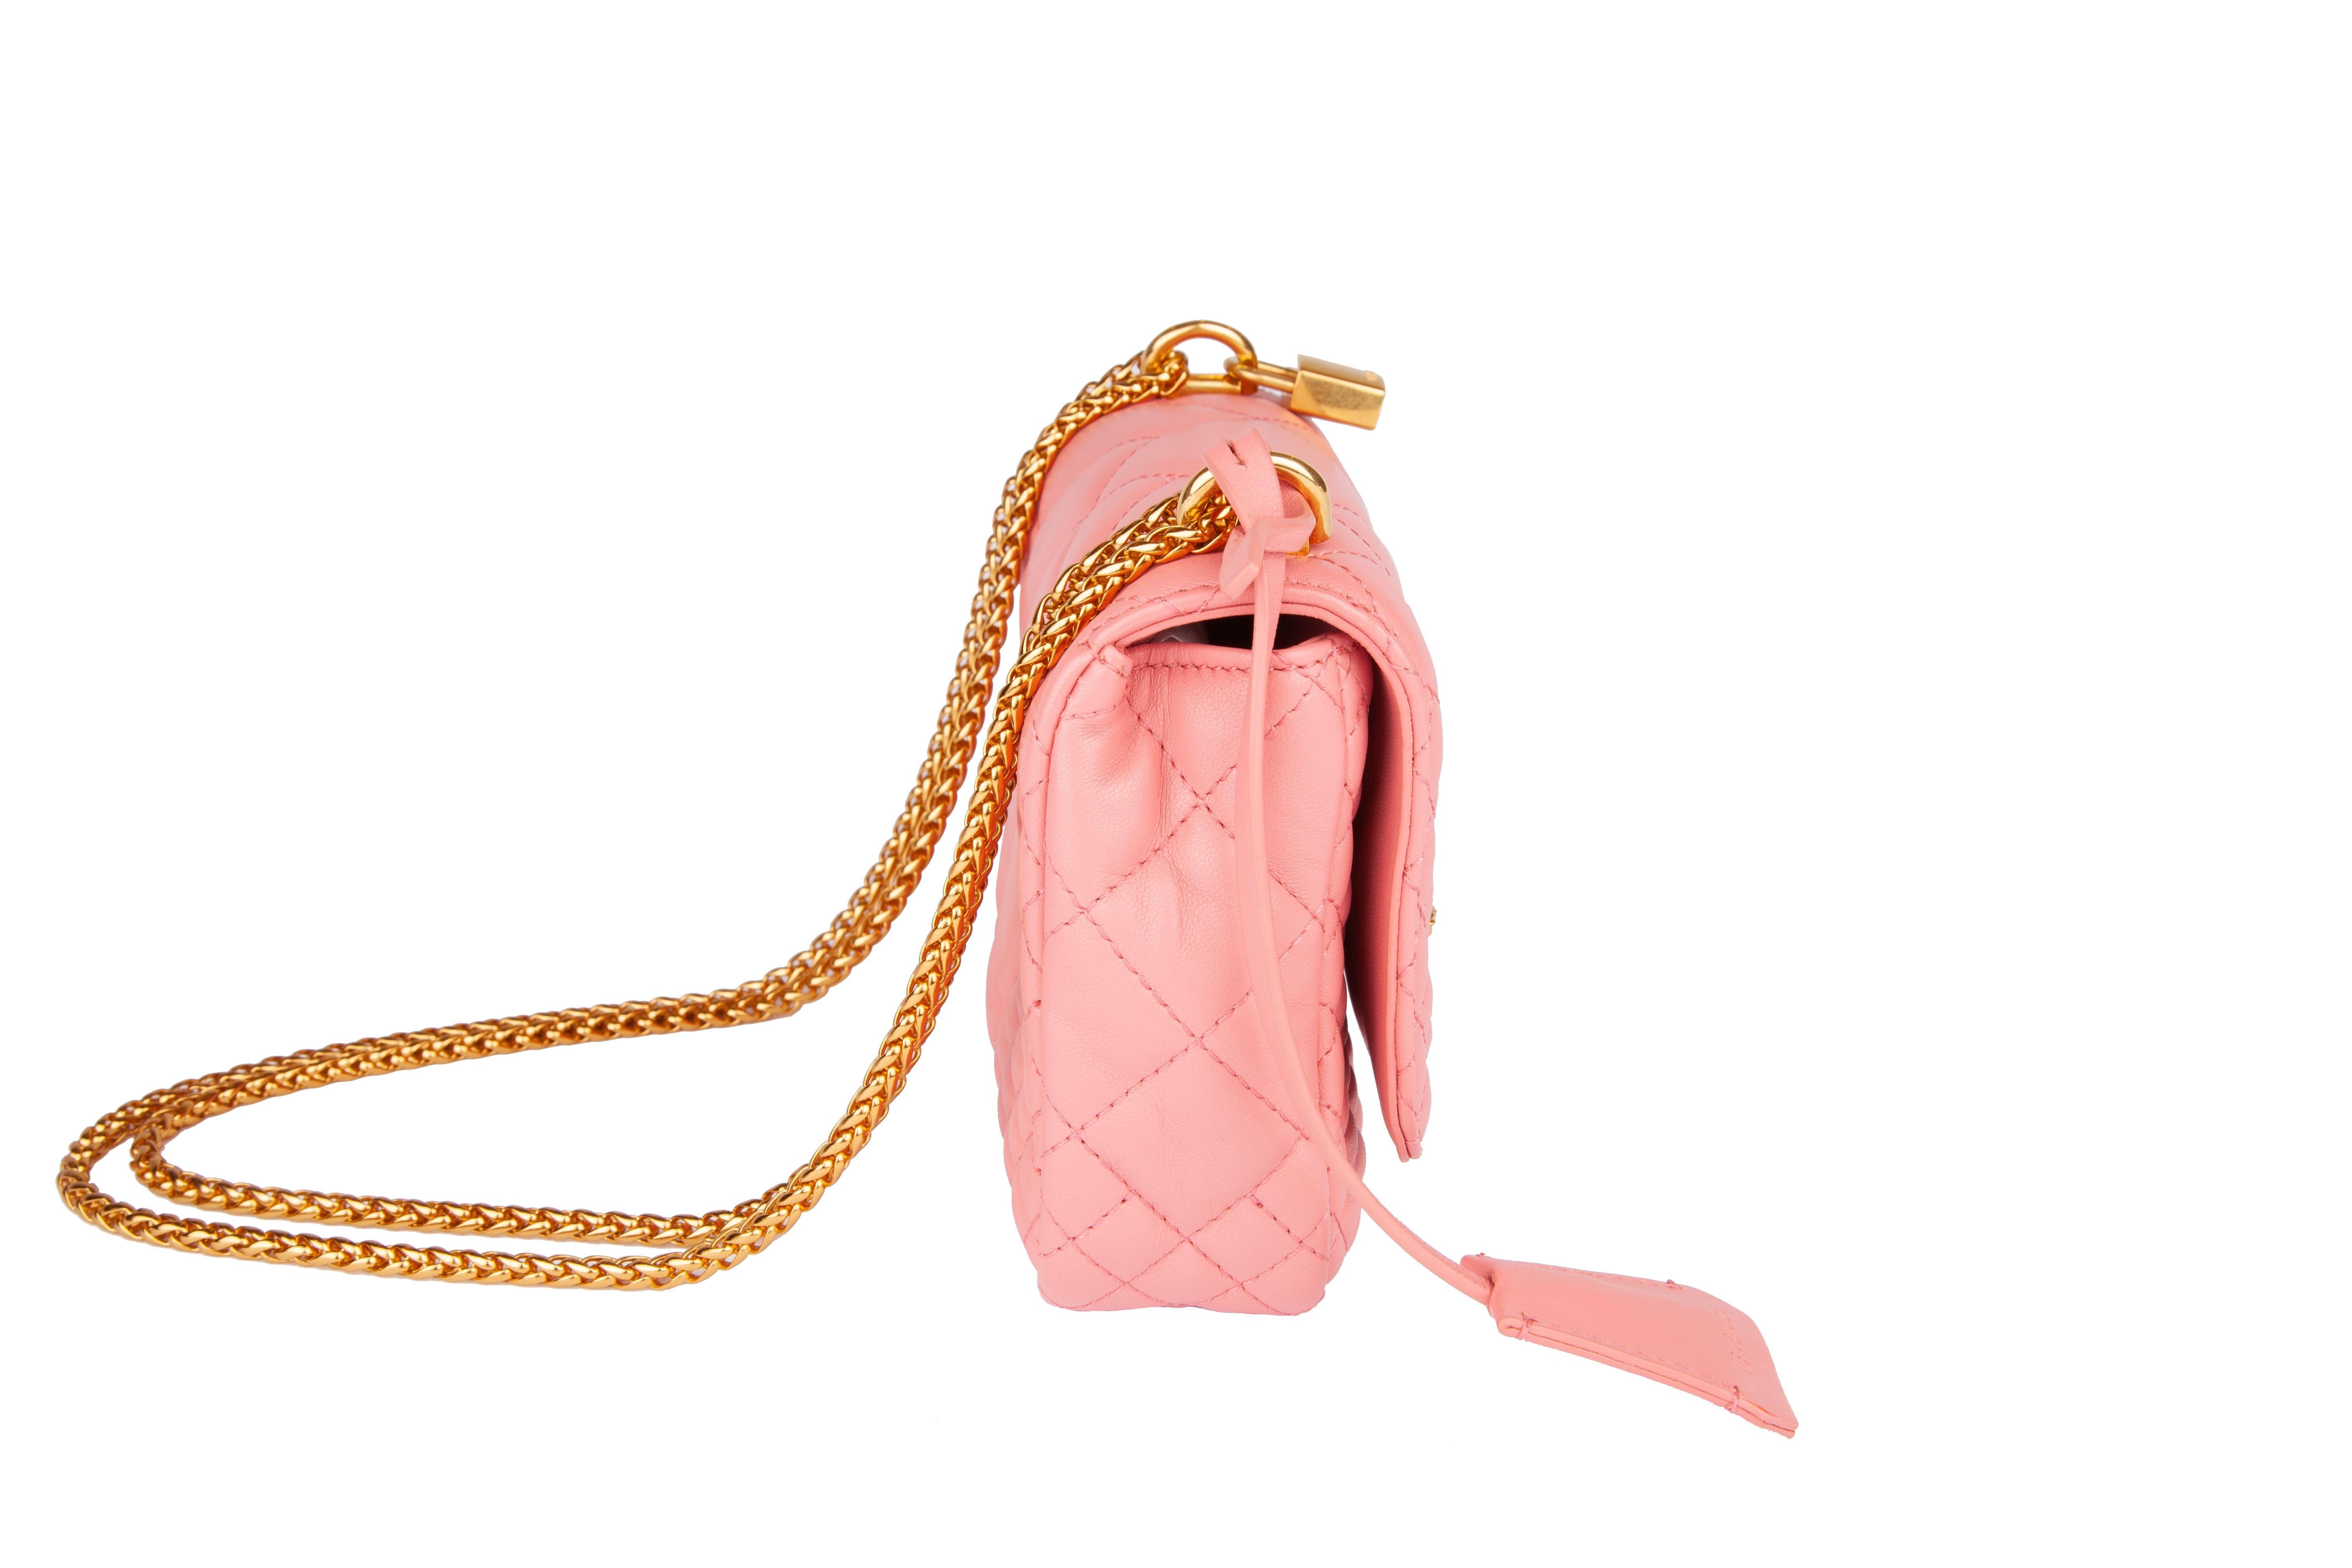 This Versace small shell pink icon shoulder bag features quilted calf leather, gold tone chain and hardware, a flap with medusa studs, a twist clasp, and one main compartment with a slip pocket. The small icon shoulder bag is both functional and